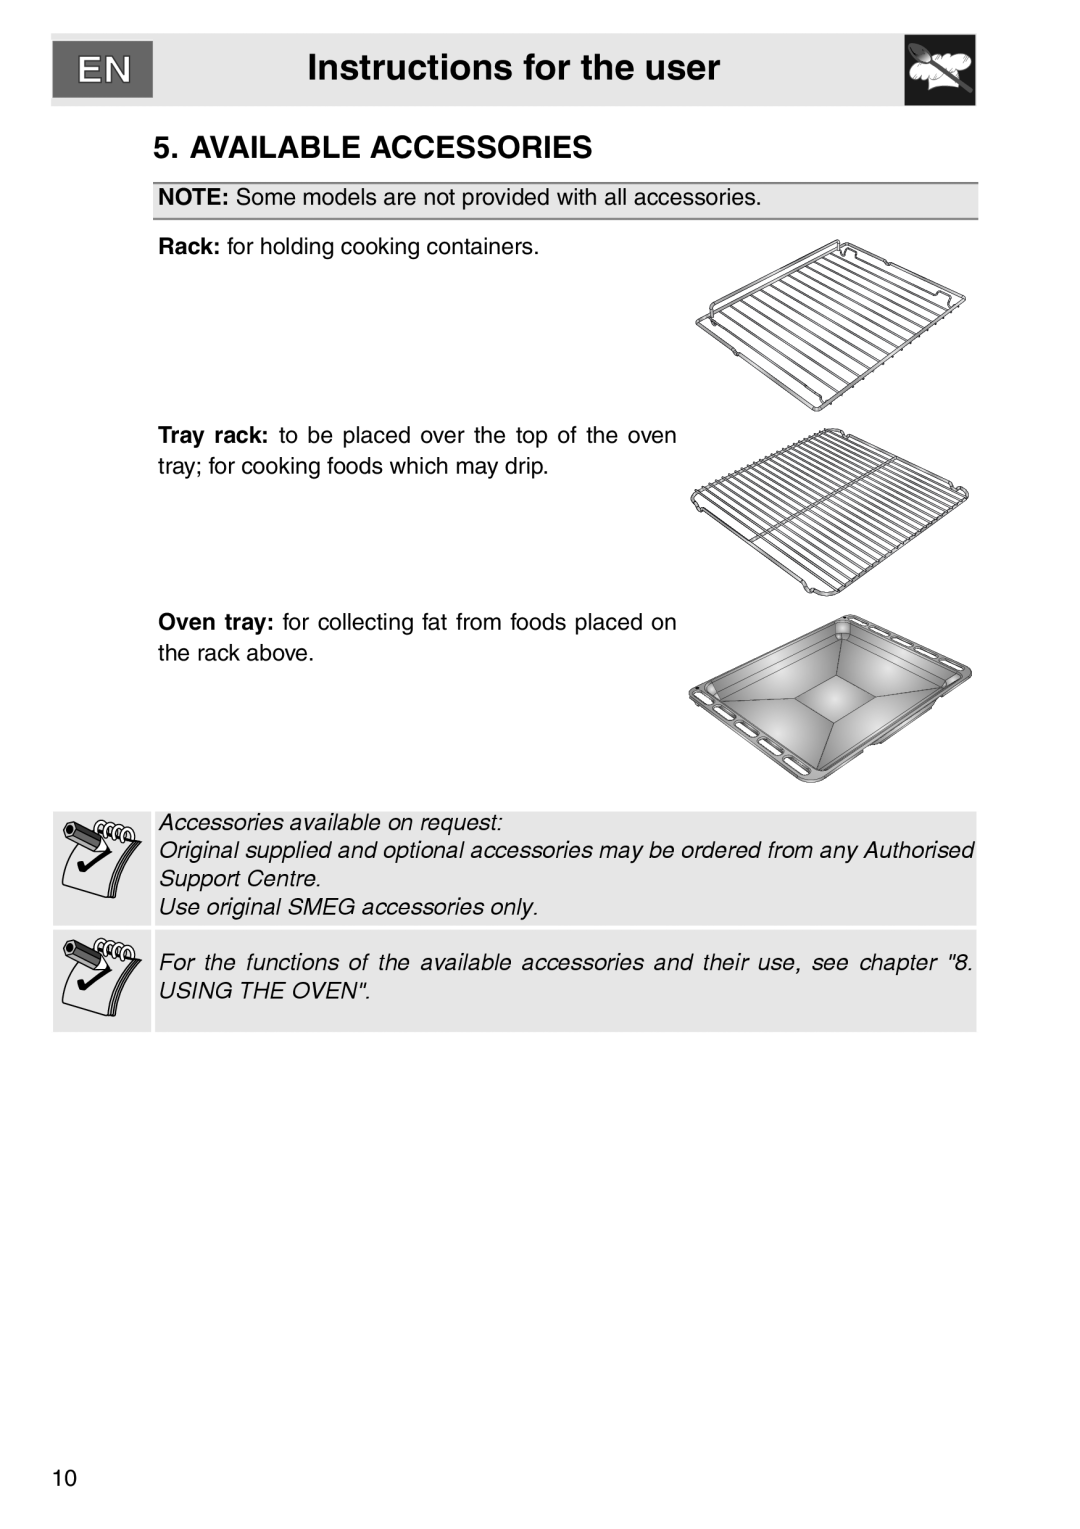 Smeg smeg Double Oven, DOSCA36X-8 installation instructions Available Accessories, Instructions for the user 